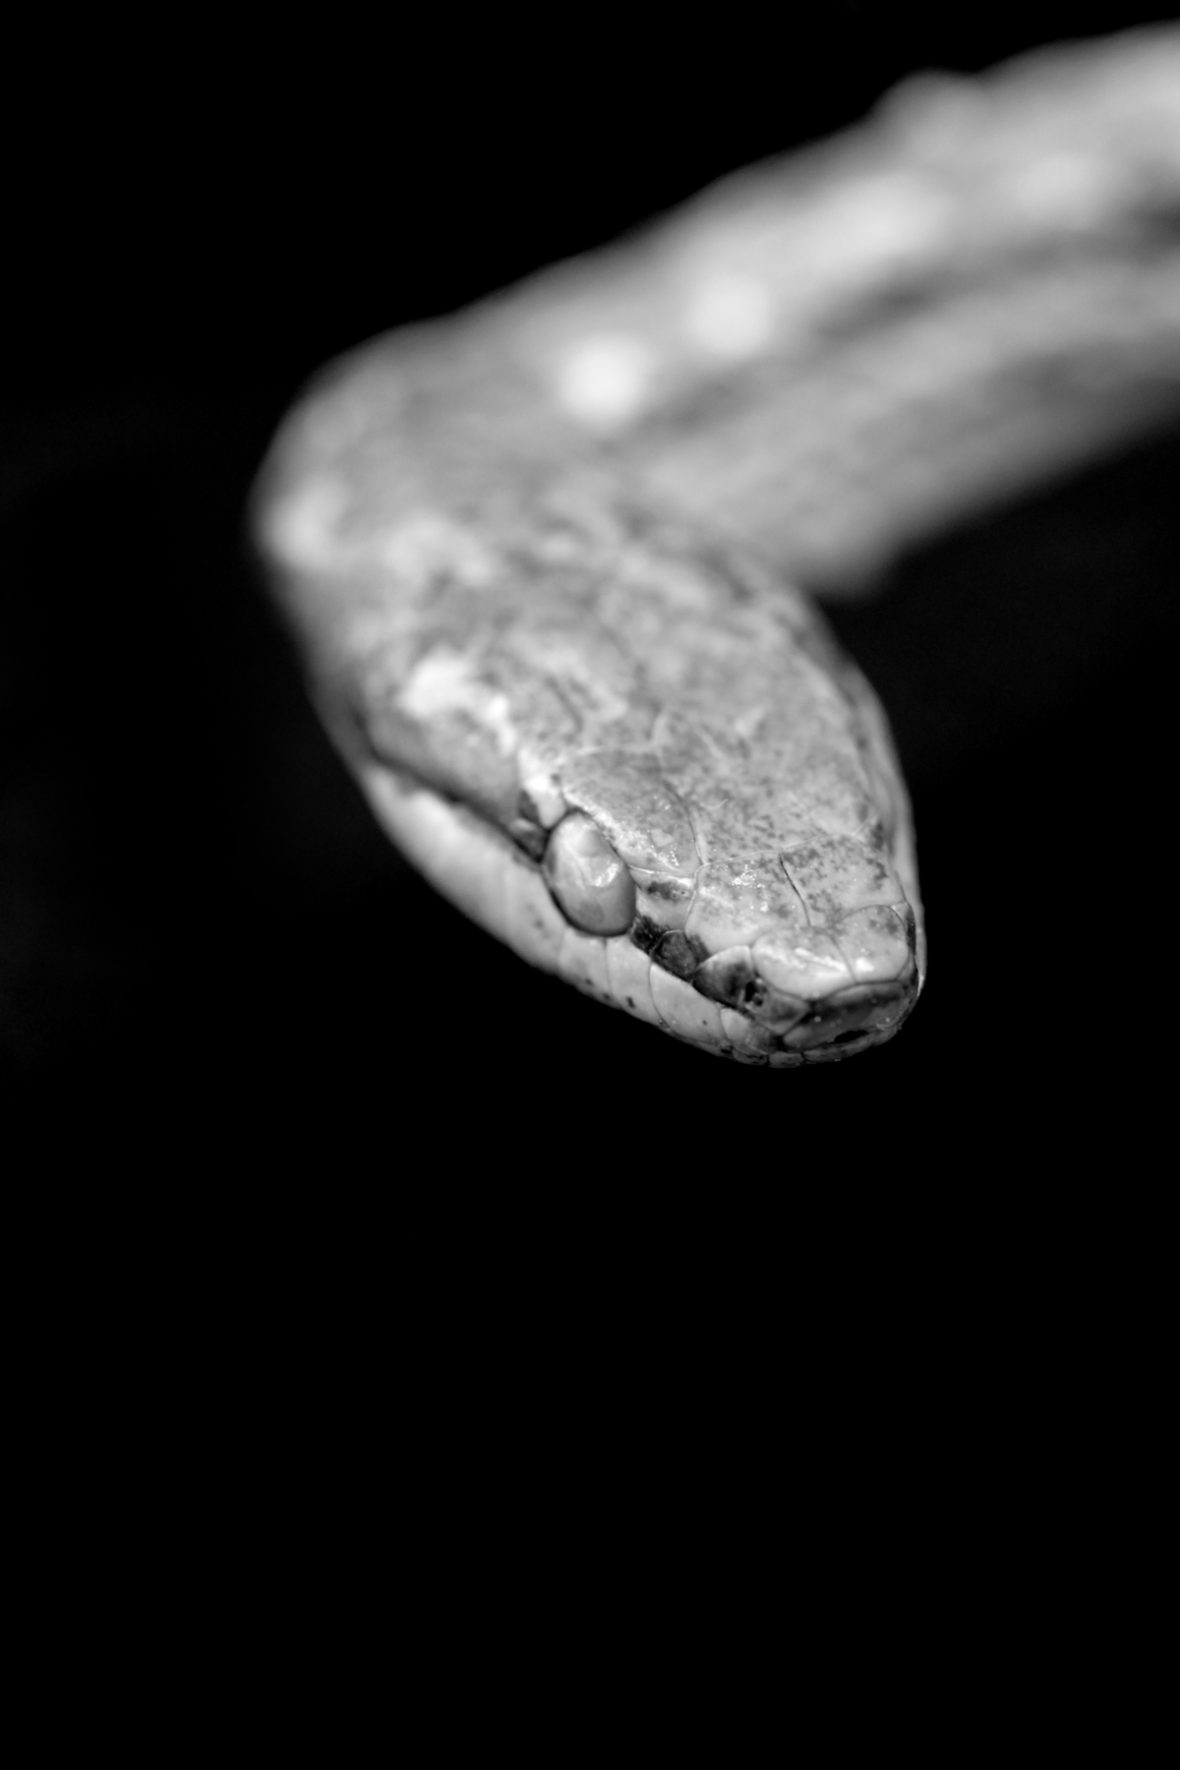 The St. Croix Racer is a snake species of the family Colubridae, which occurred on the Virgin Islands and probably extinct since 1898.